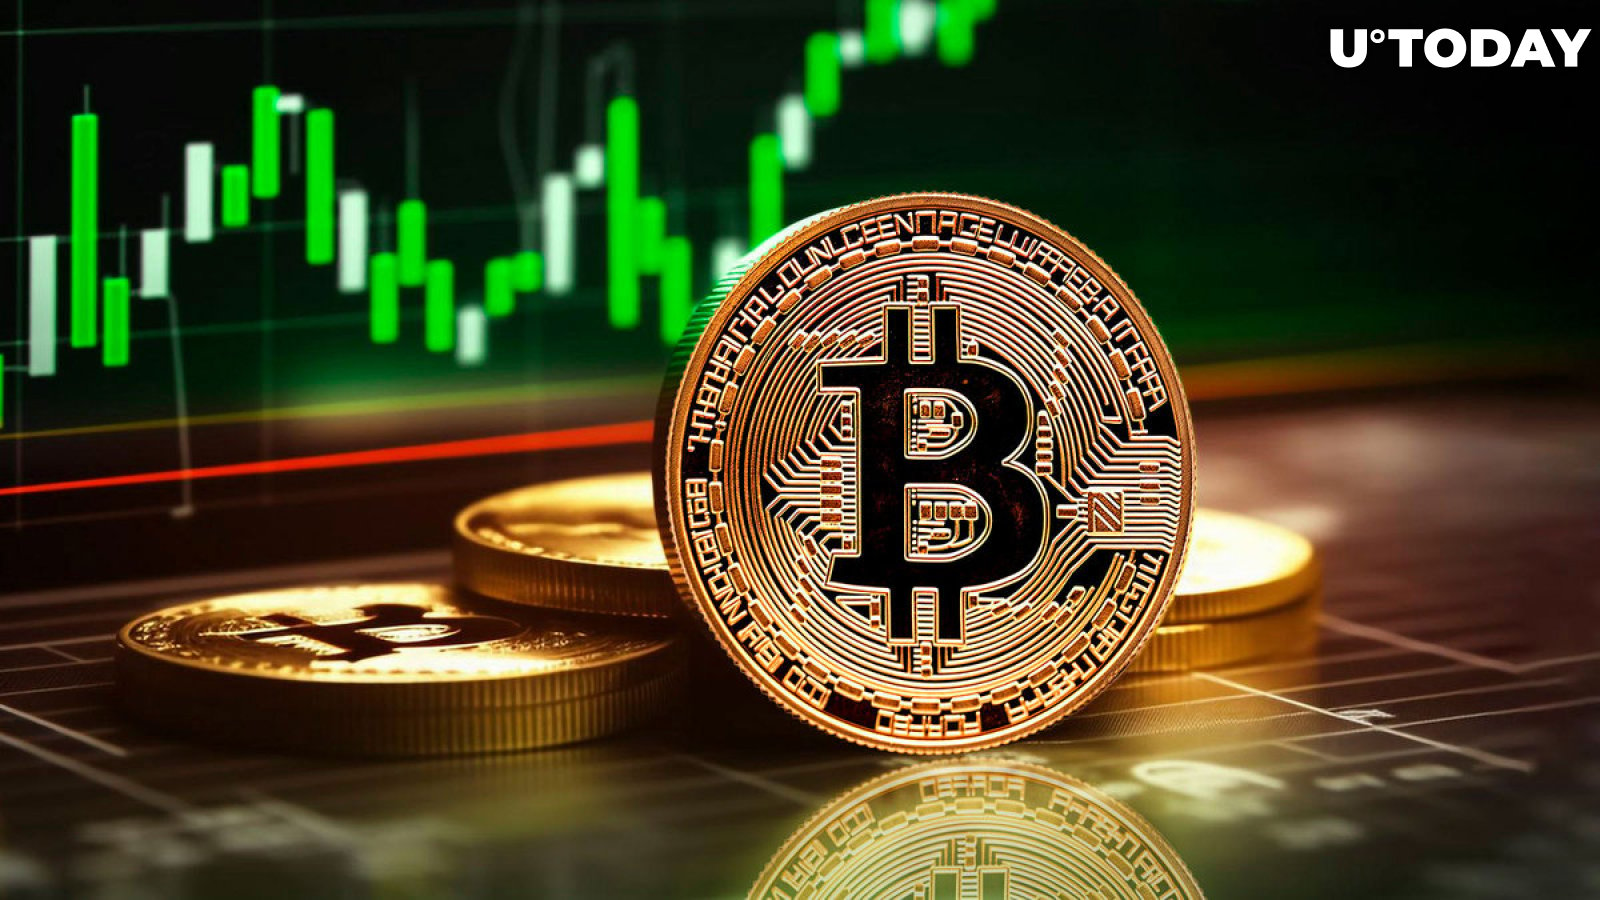 Bitcoin (BTC) Price to $50,000 Thanks to $1 Billion Squeeze Possible